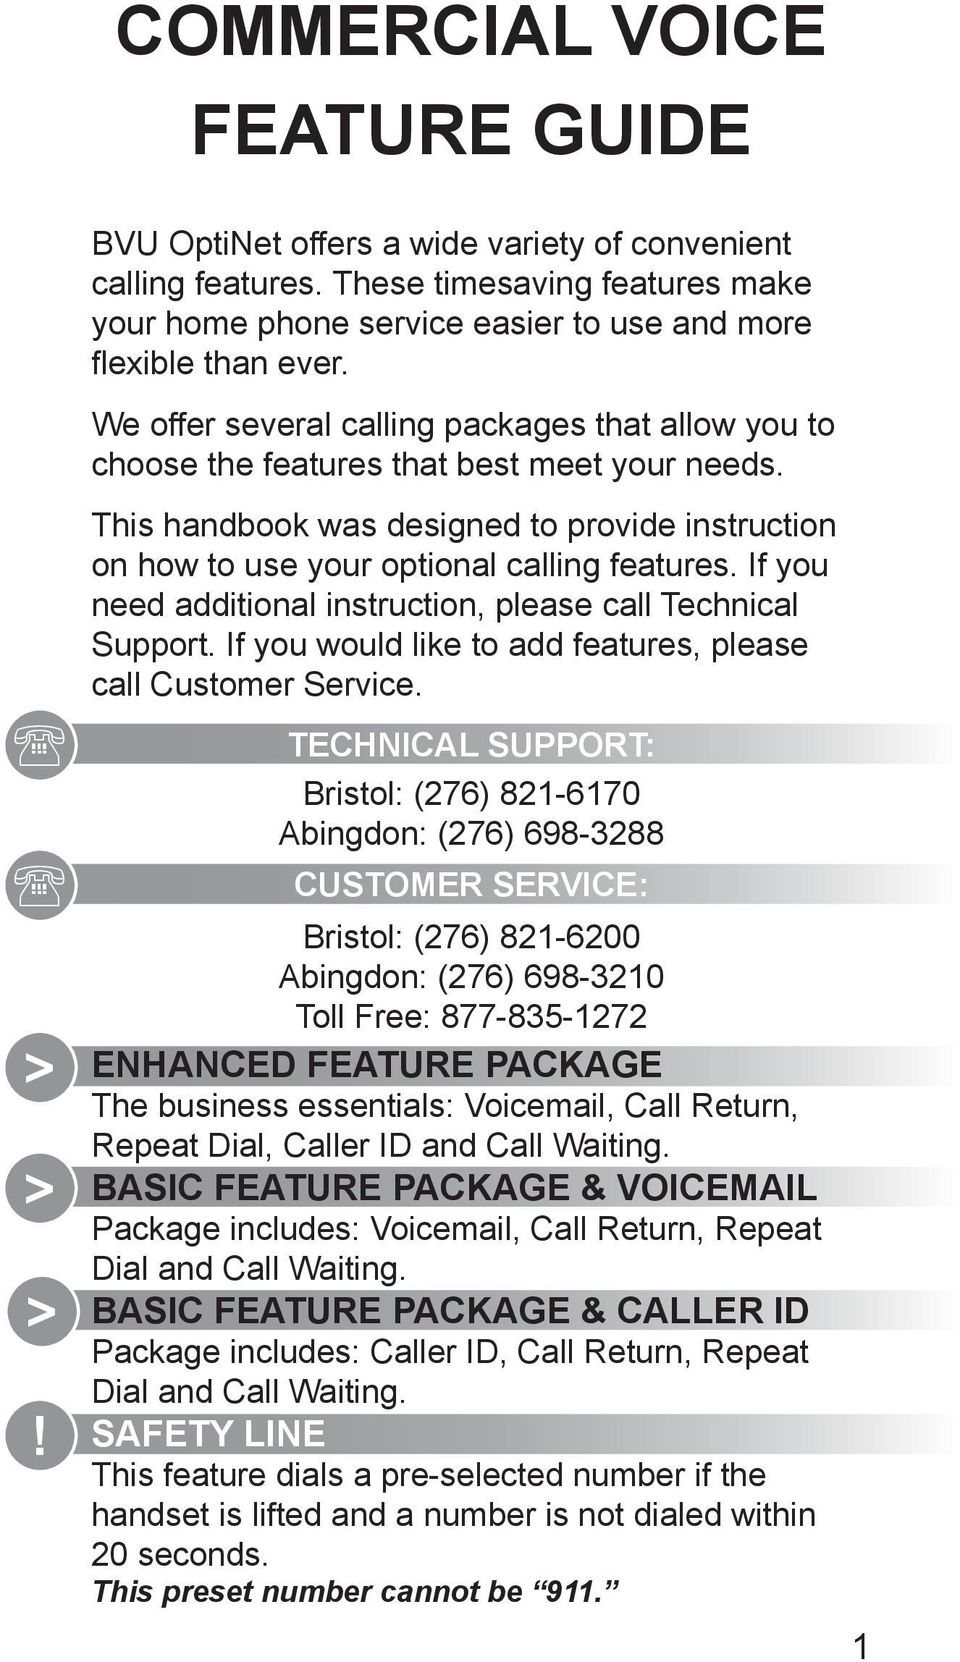 This handbook was designed to provide instruction on how to use your optional calling features. If you need additional instruction, please call Technical Support.